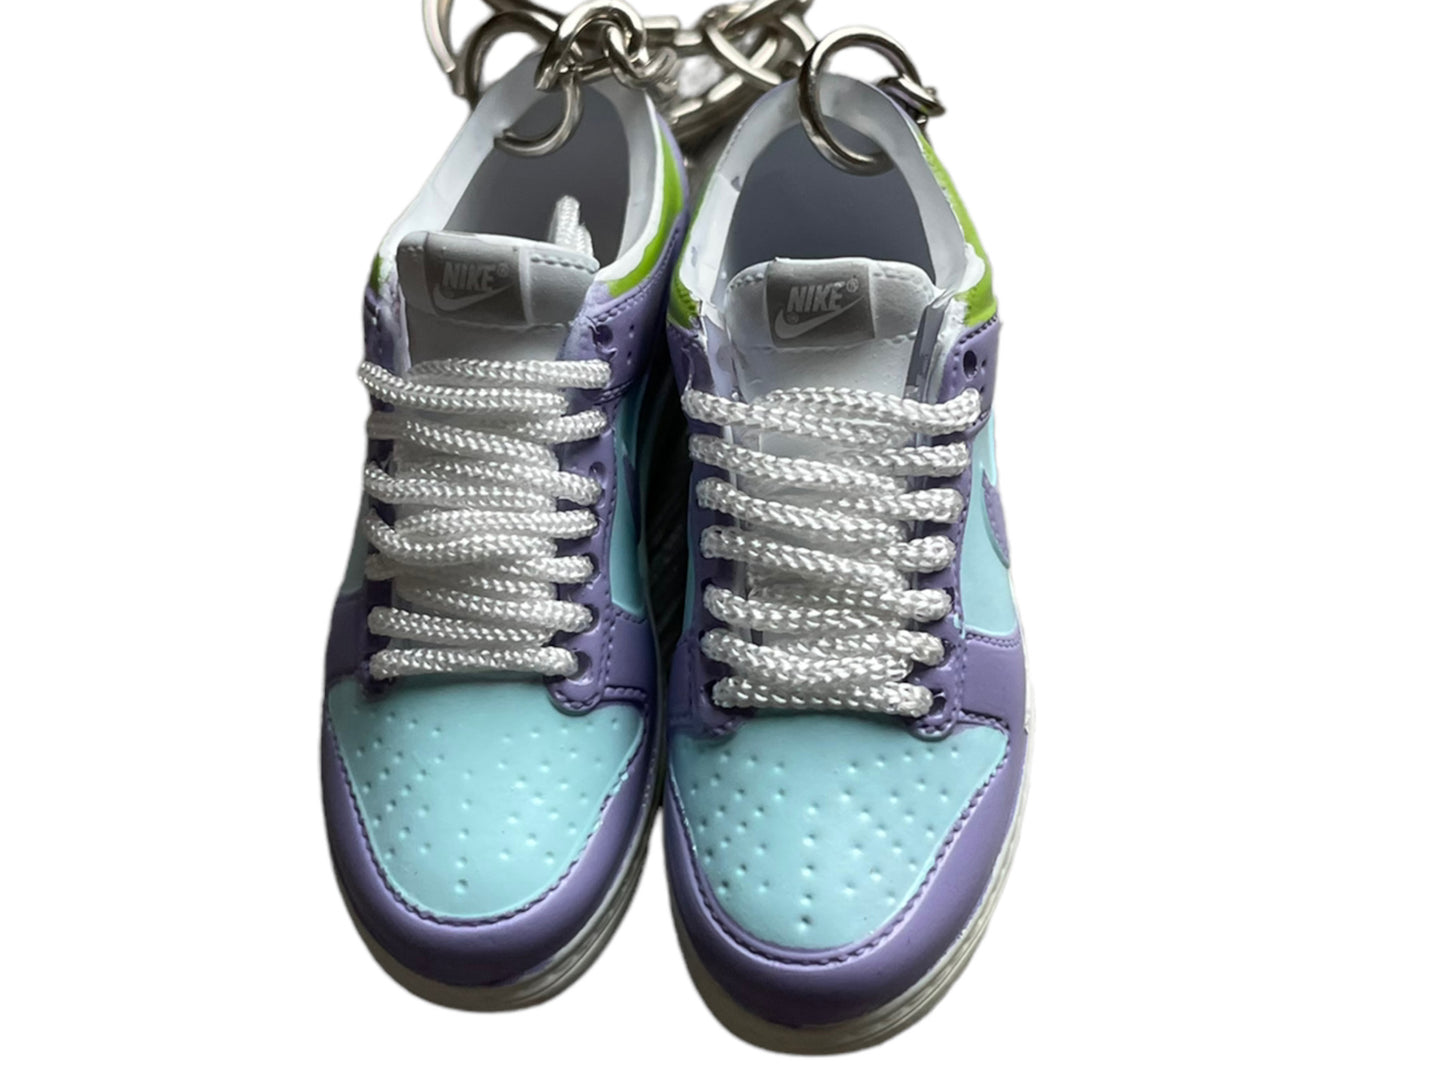 Mini sneaker keychain 3D Dunk - To the rescue